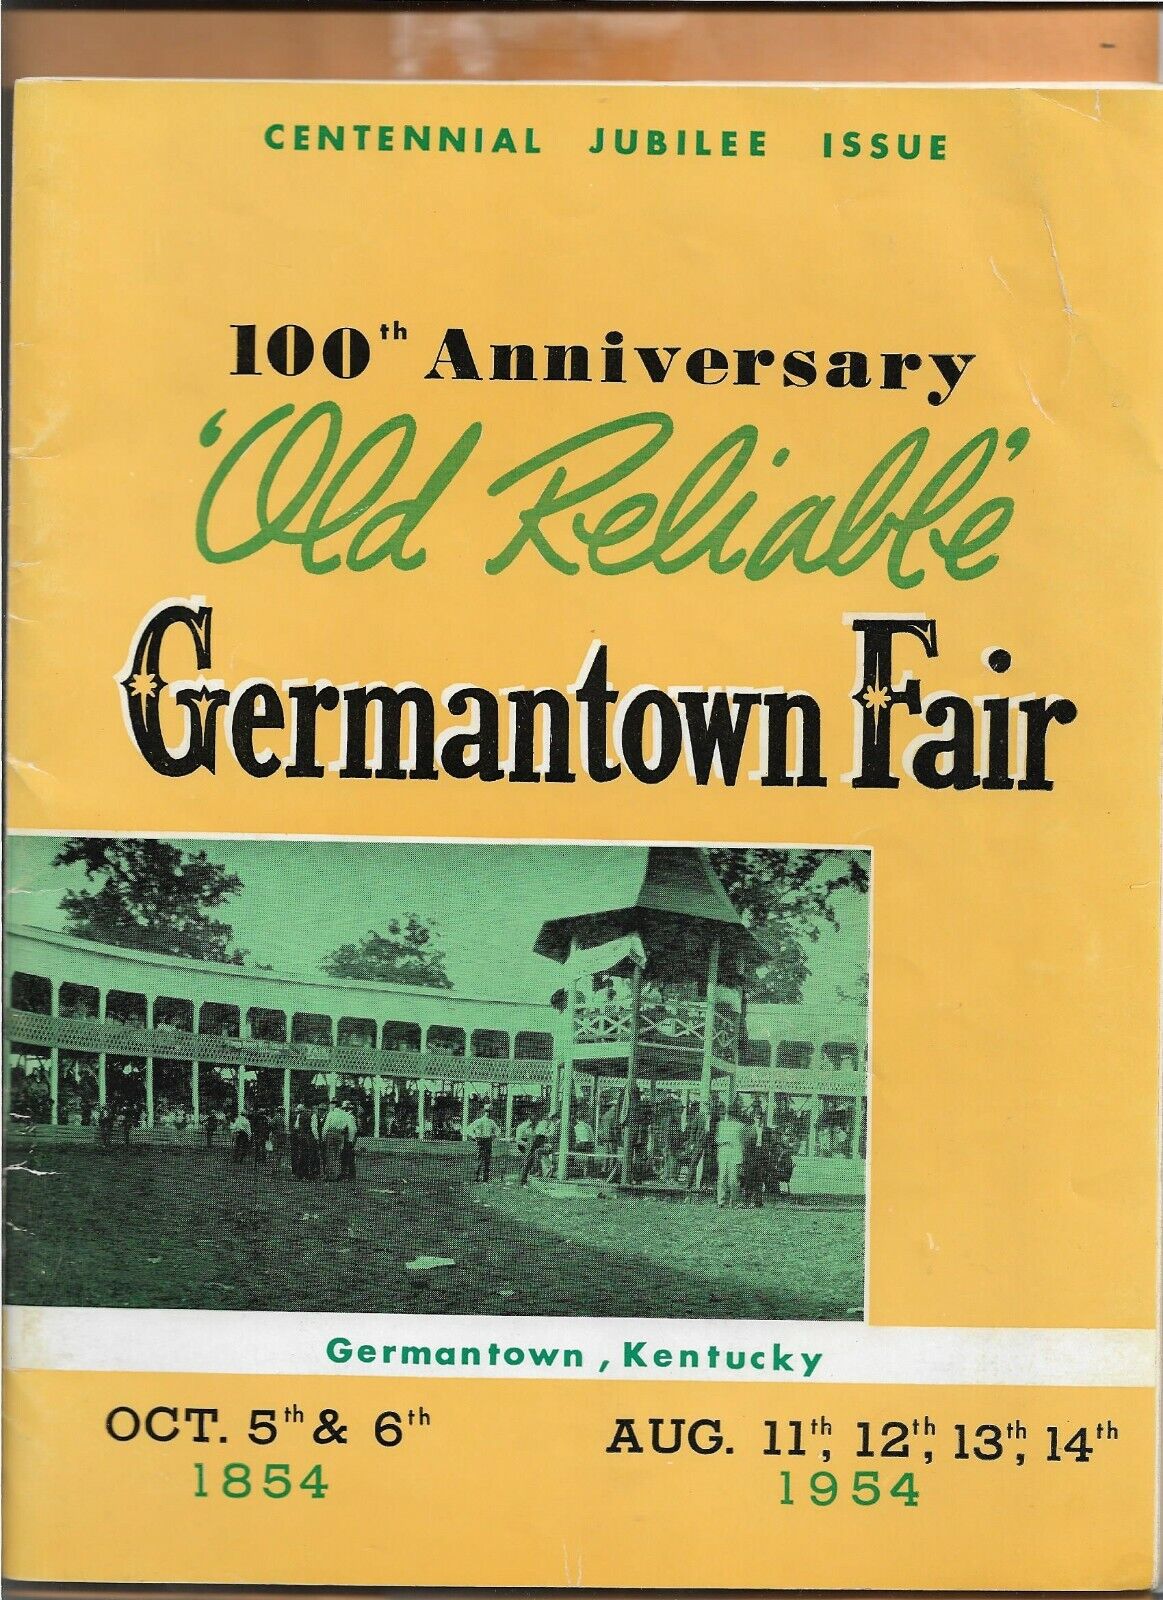 GERMANTOWN FAIR 100th ANNIVERSARY ISSUE 1954 72 PAGES VINTAGE ADVERTISING